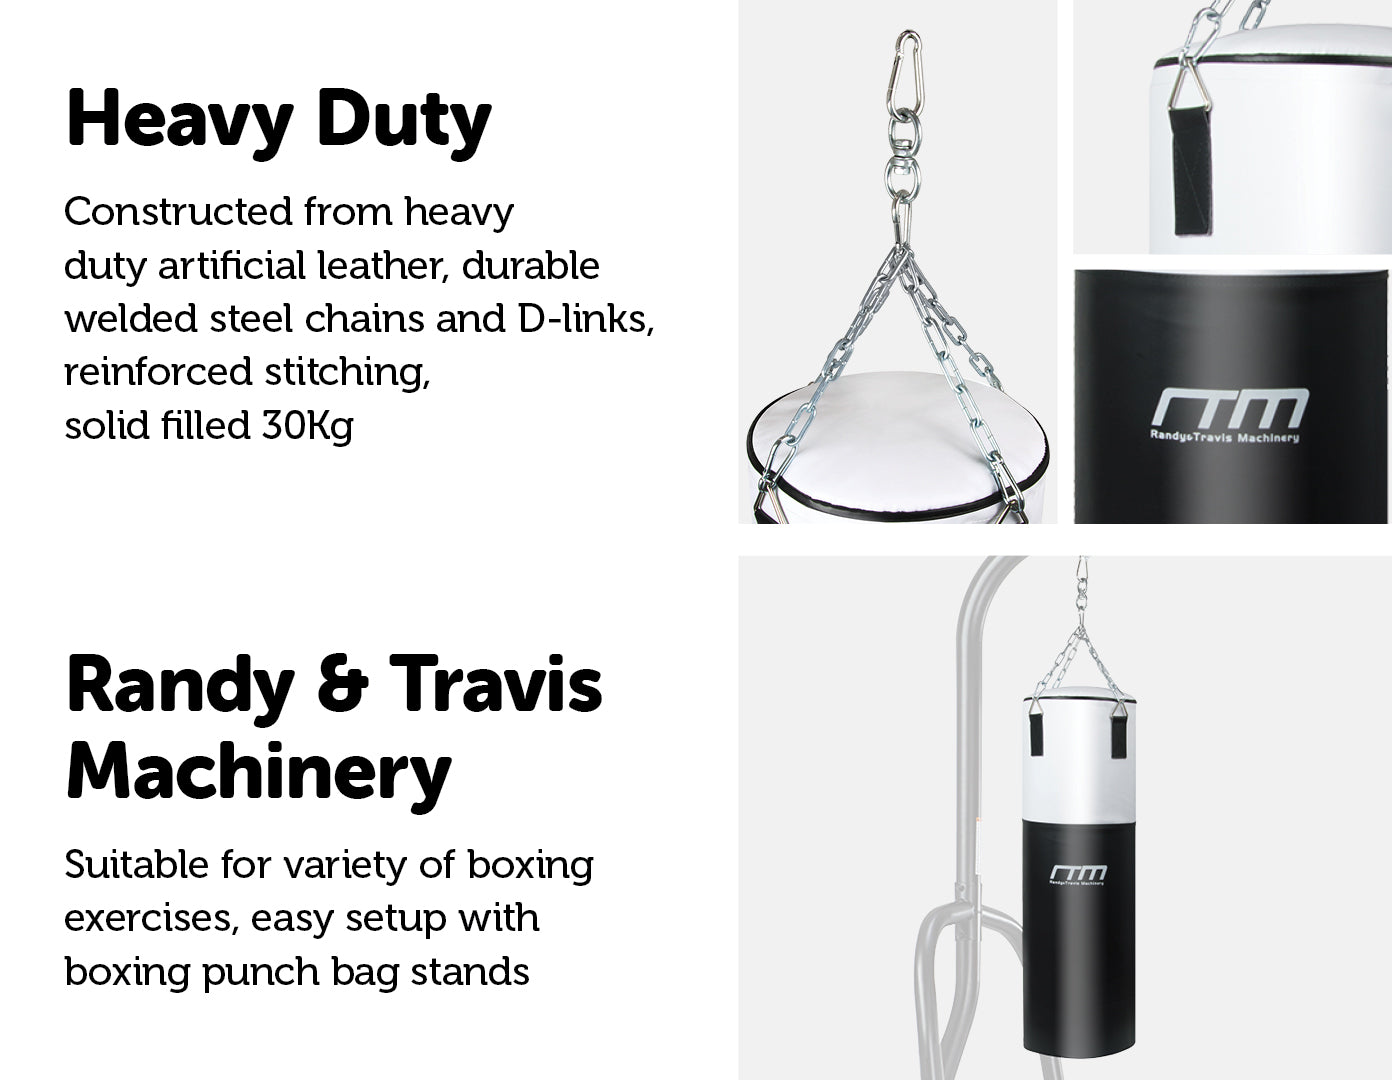 30kg Heavy Duty Boxing Punching Bag Solid Filled - image5